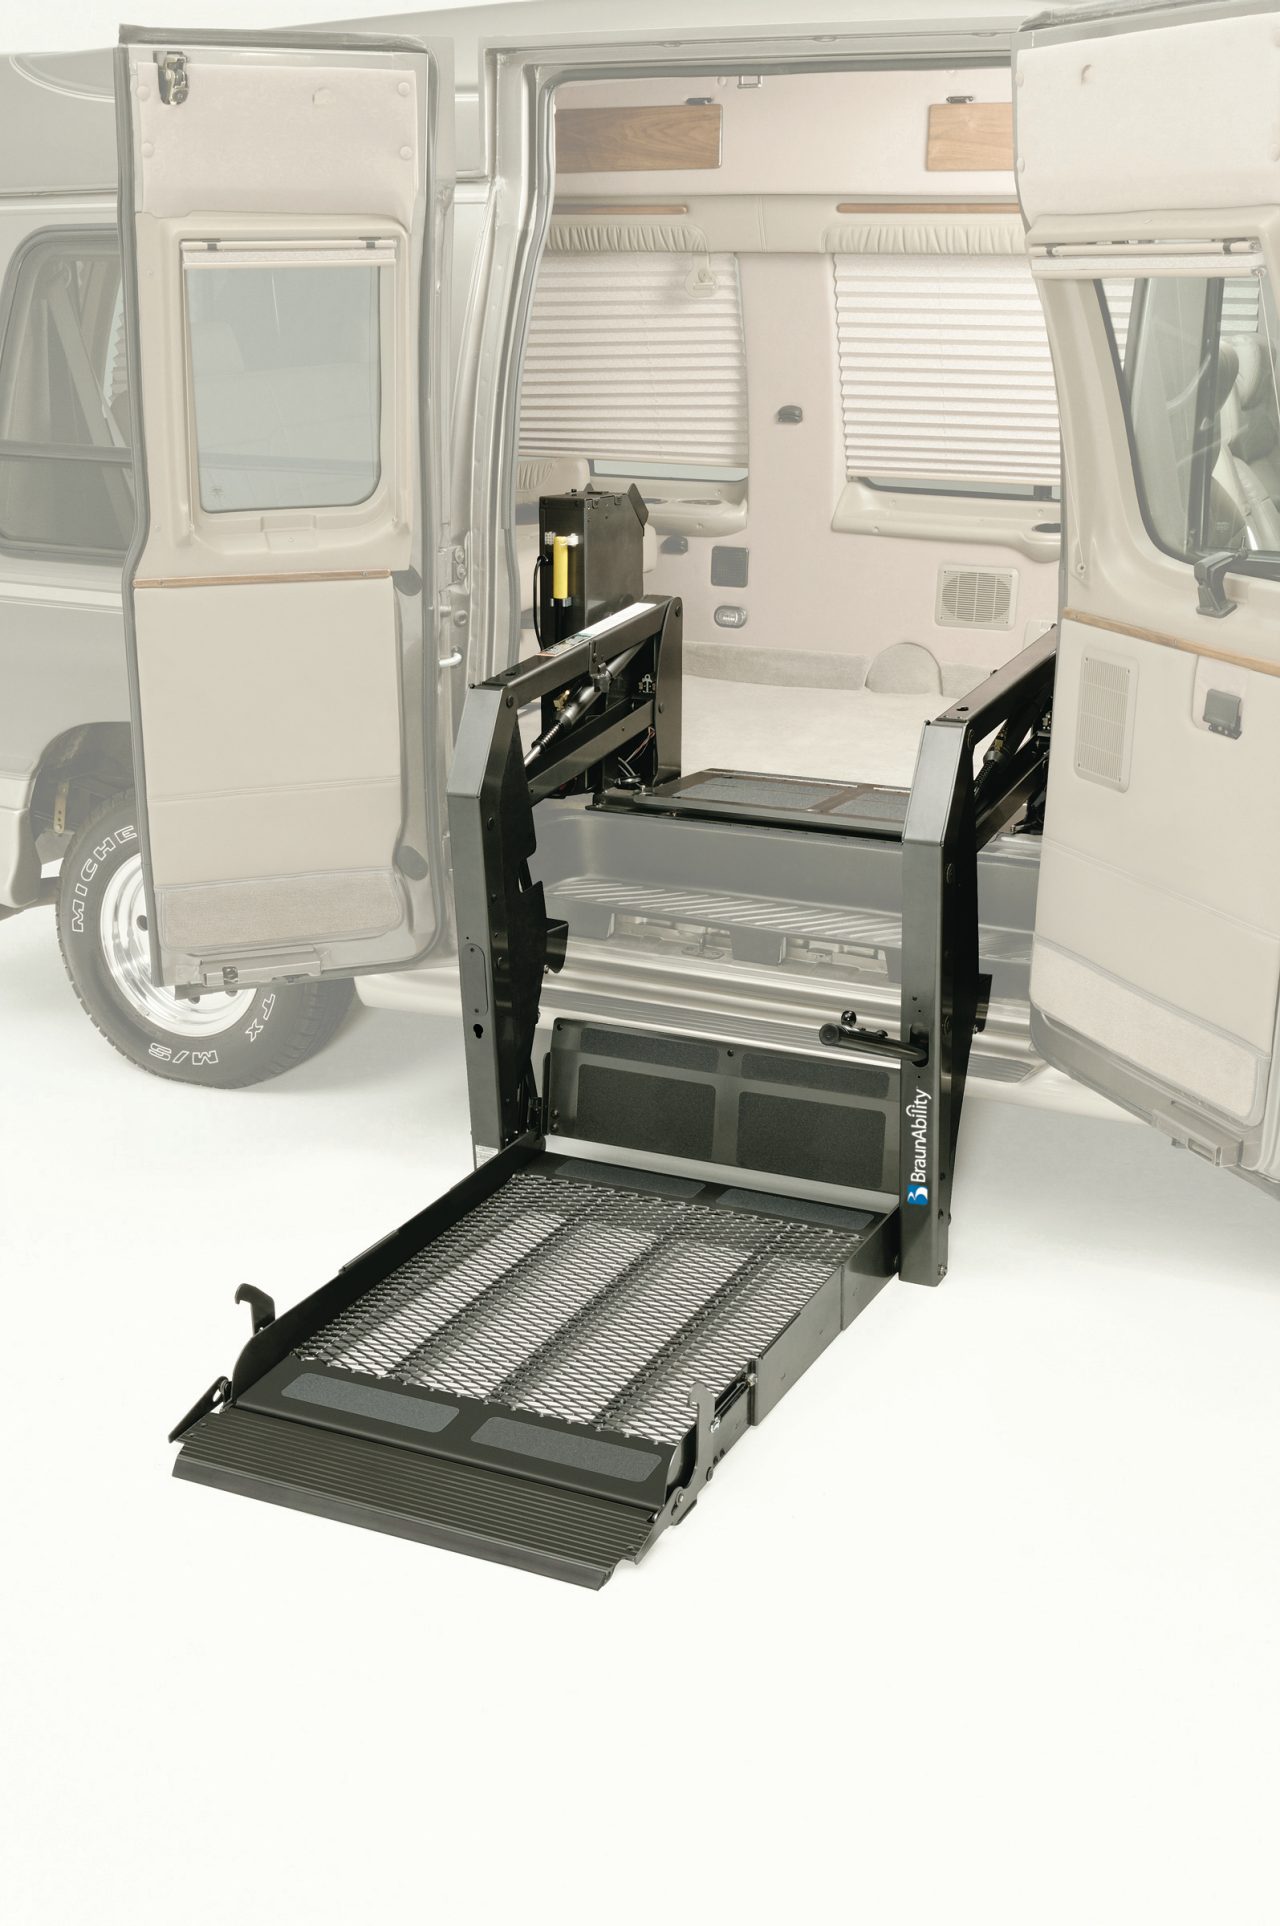 Century Occupied Wheelchair Lift from BraunAbility for Full-Size Vans